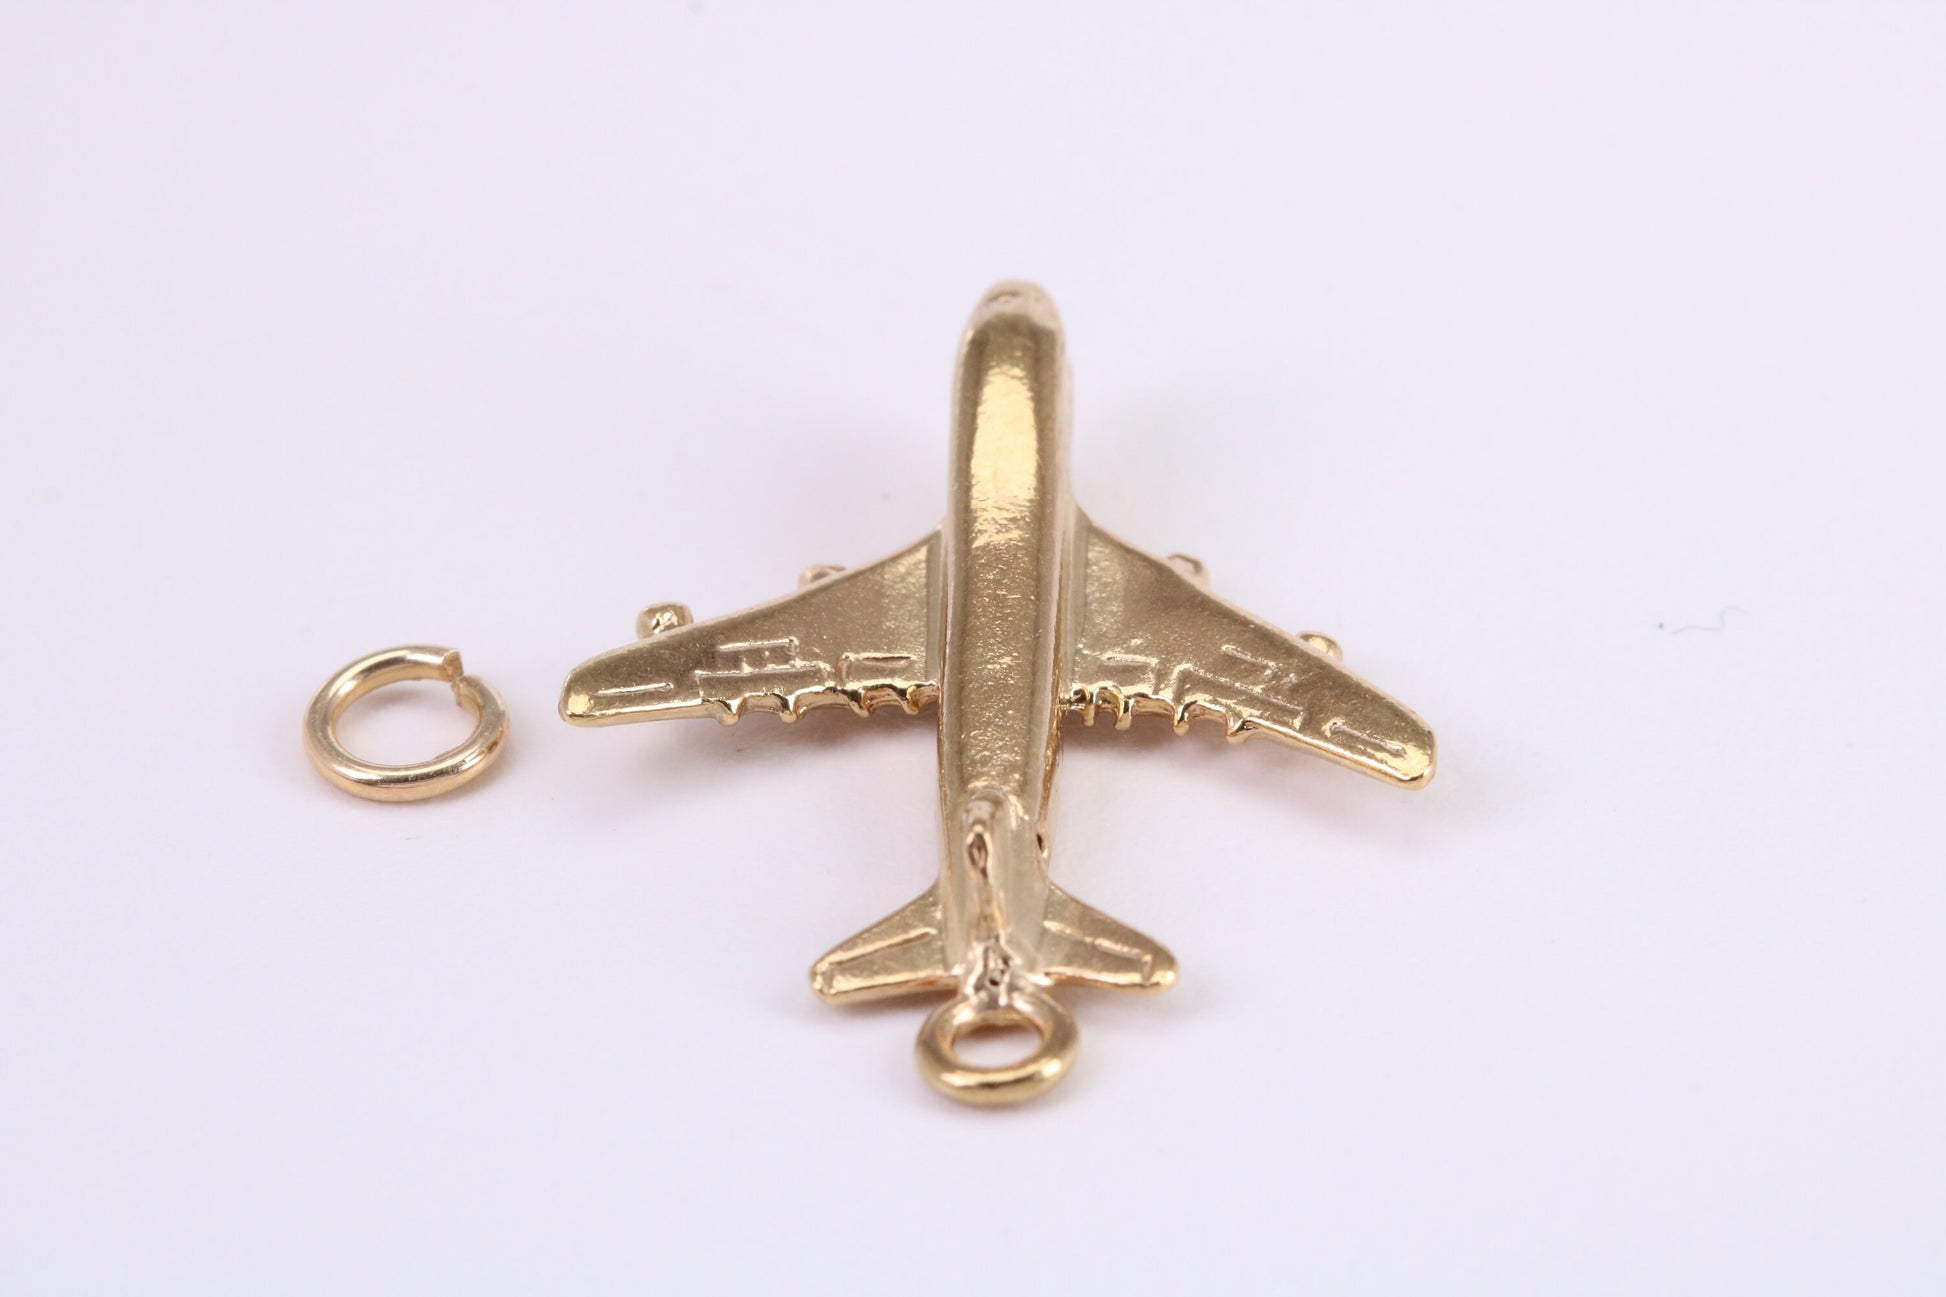 Jumbo Jet 747 Charm, Traditional Charm, Made from Solid Yellow Gold, British Hallmarked, Complete with Attachment Link